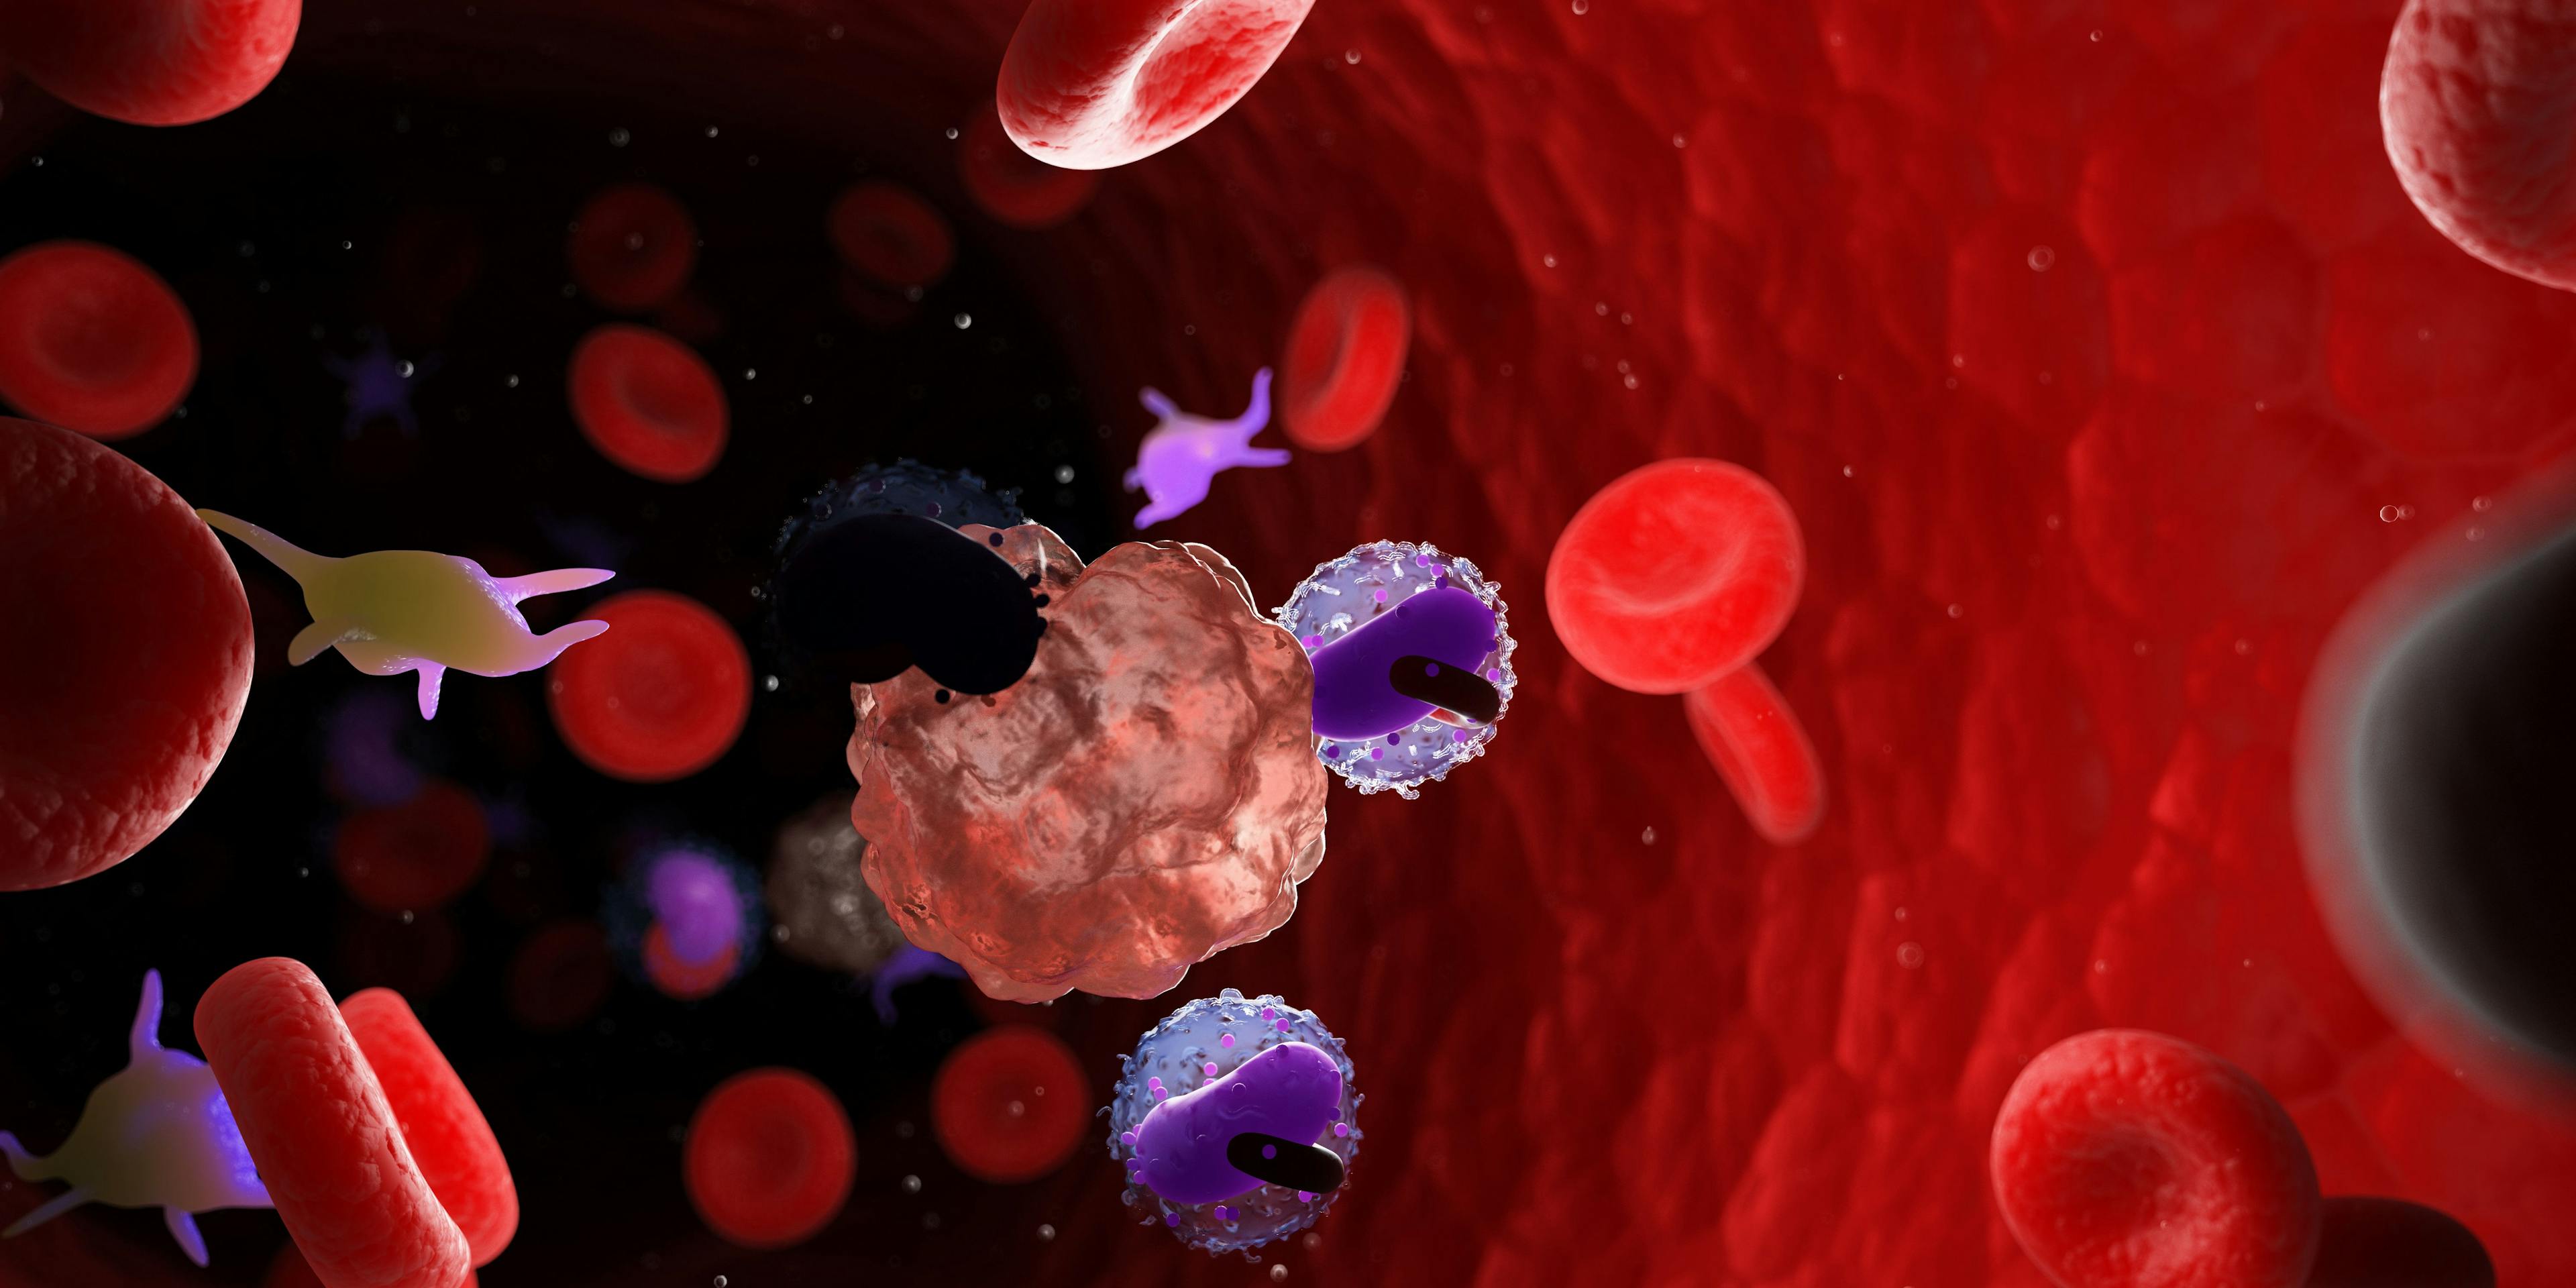 Dual-Targeted CAR T Therapy Efficacious in Relapsed/Refractory B-Cell Malignancies